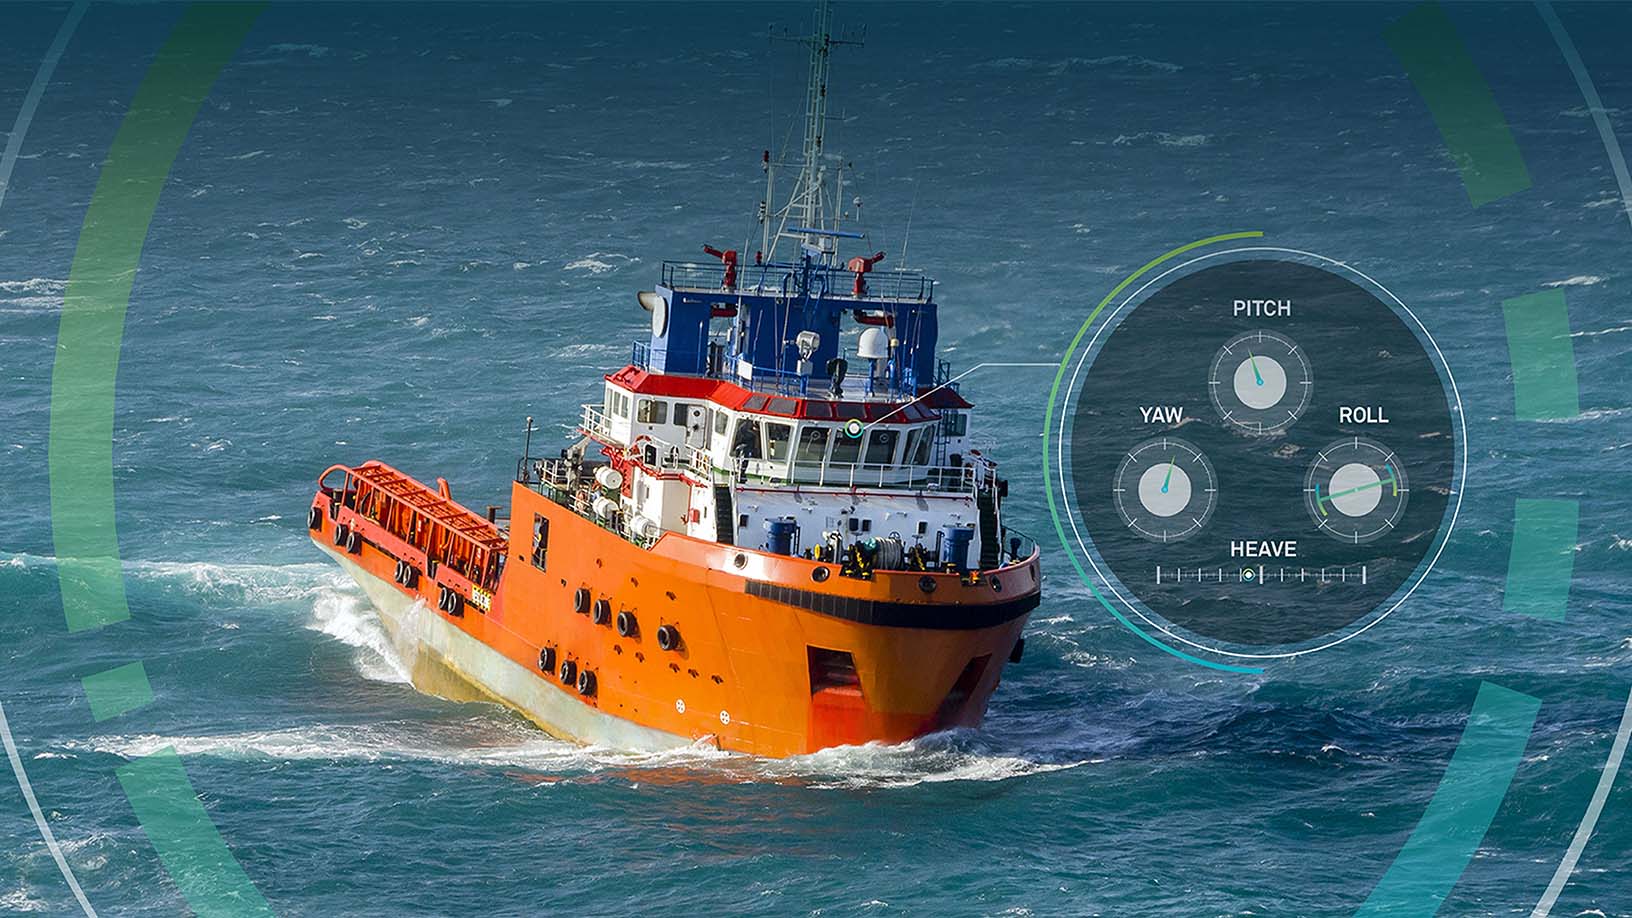 Offshore vessel with superimposed graphics